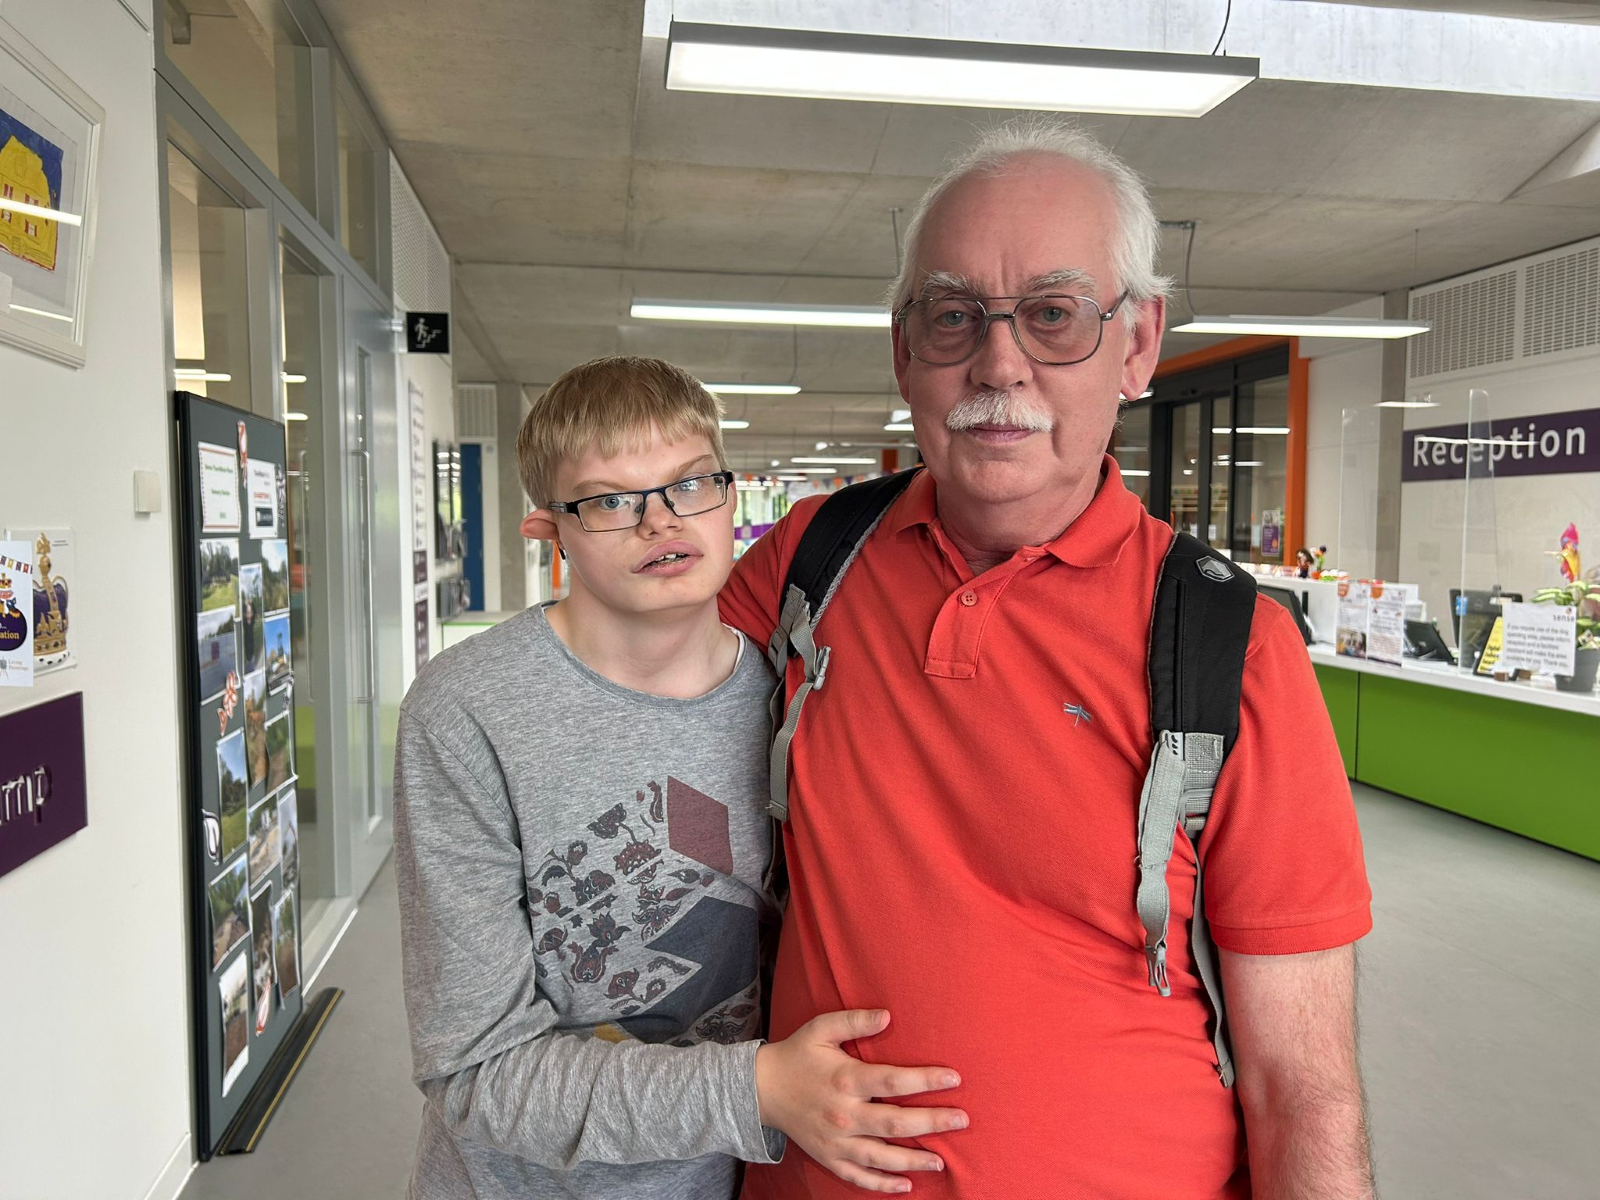 Keith Butler, 72, and his partner Helen, 64, are full-time carers for their adopted 22-year-old son Geordie